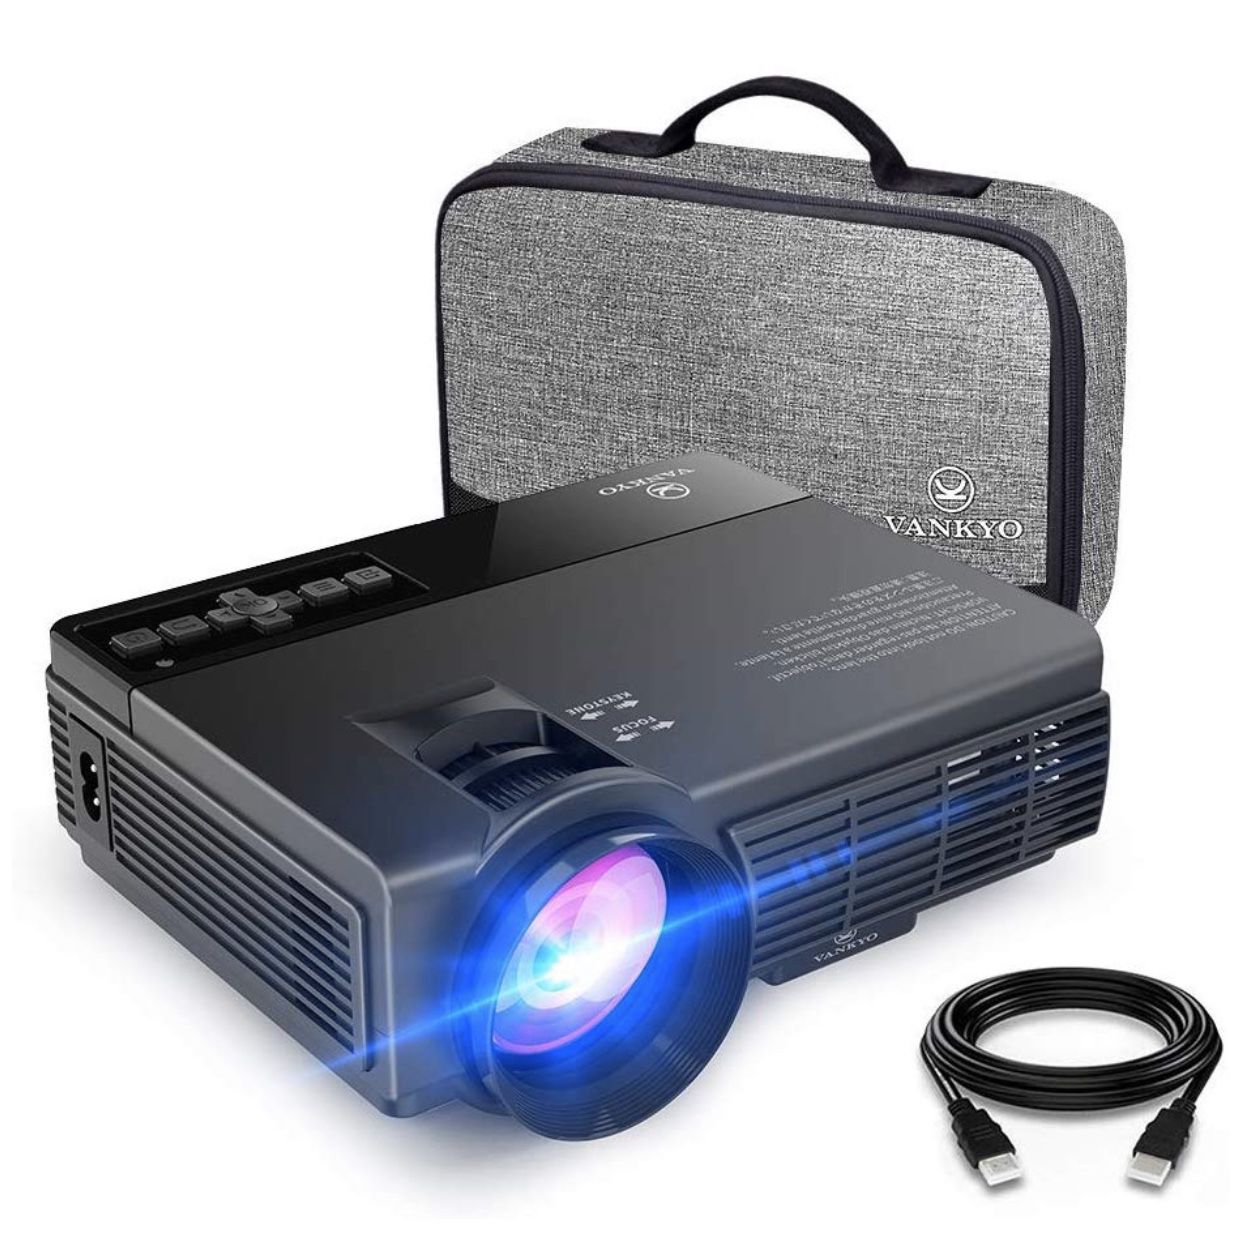 Vankyo Leisure 3(Upgraded Version) 3600L Mini Projector with 40000 Hours Lamp Life, LED Portable Projector Support 1080P and 170'' Display, Compatibl